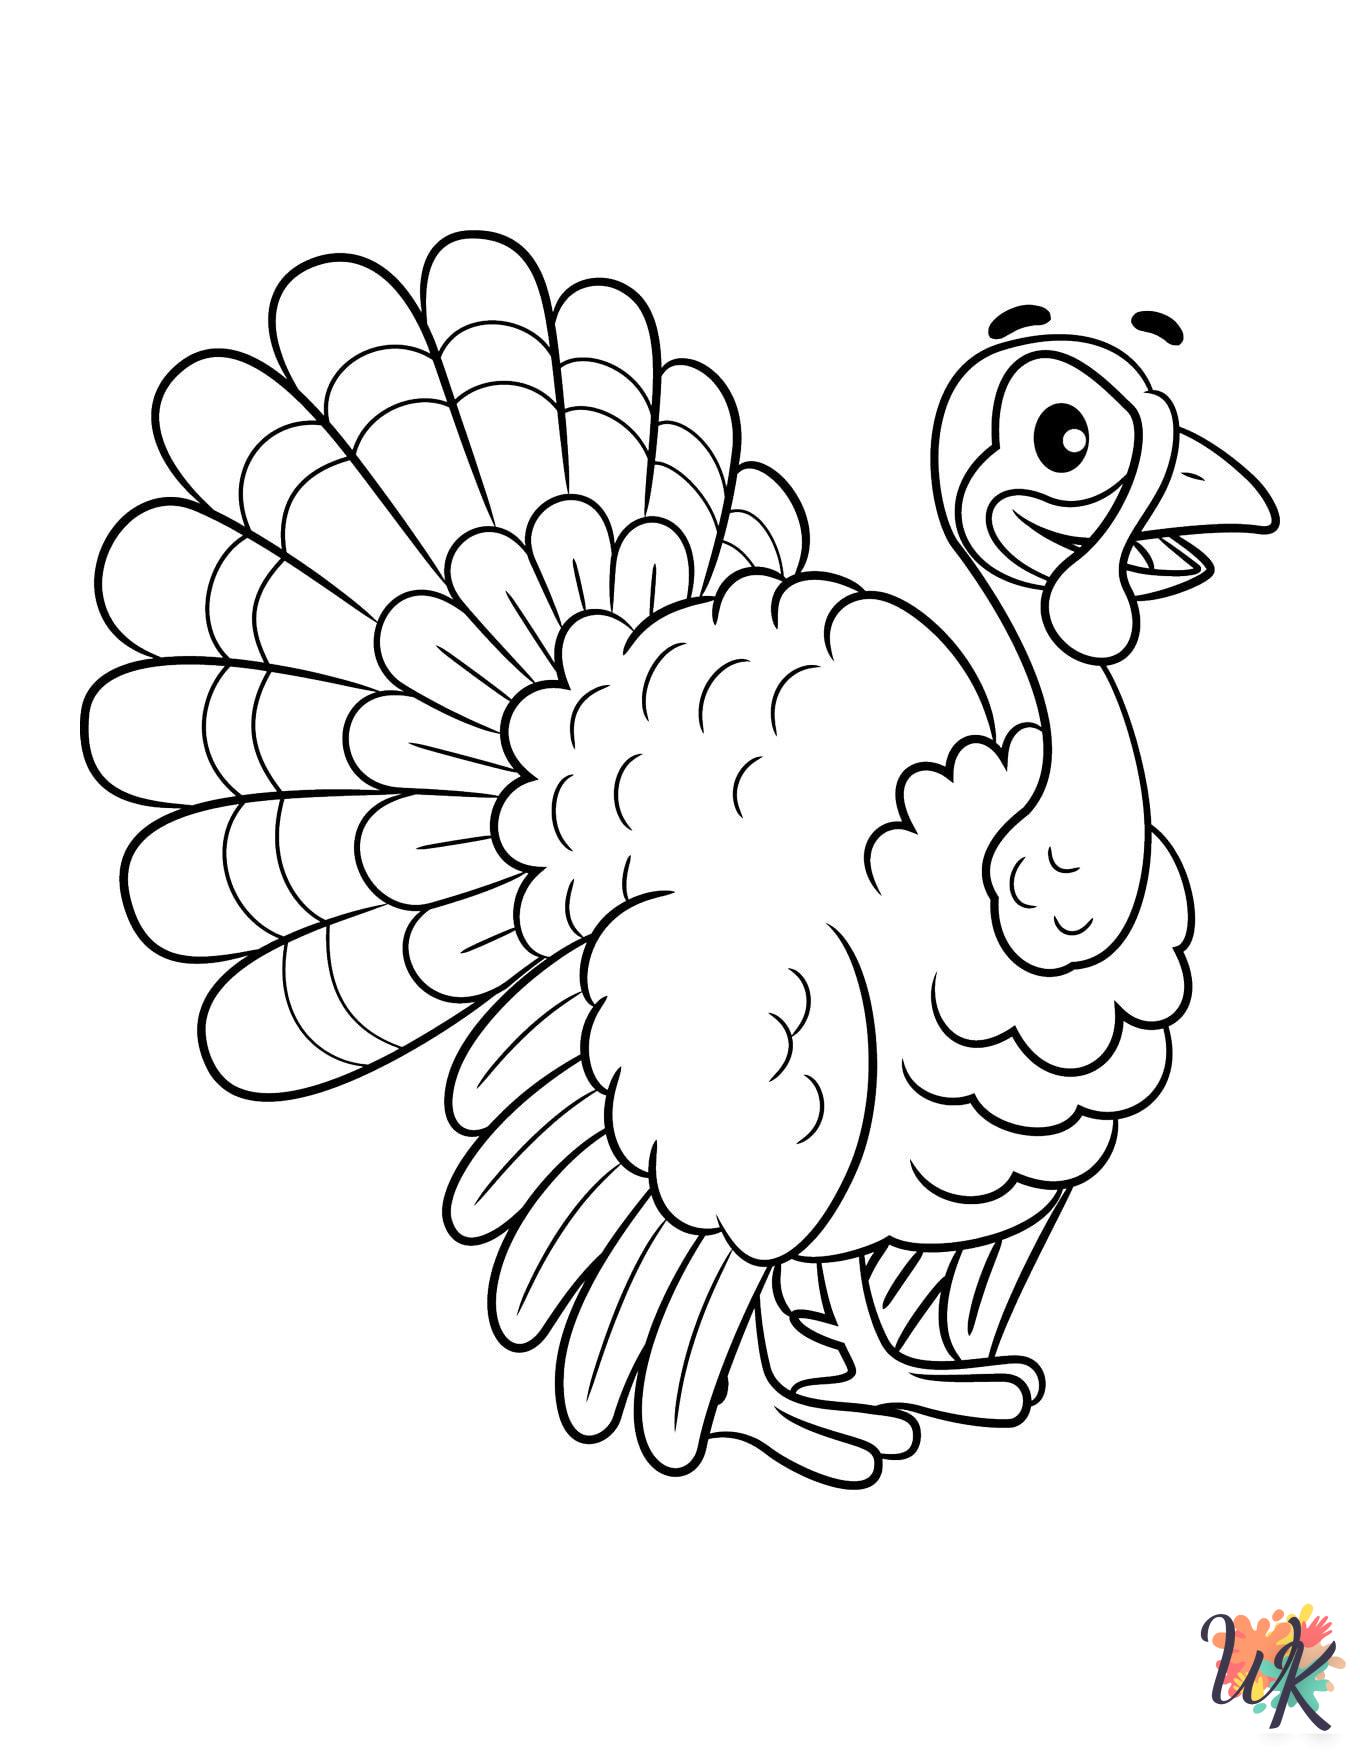 Turkey coloring pages free printable